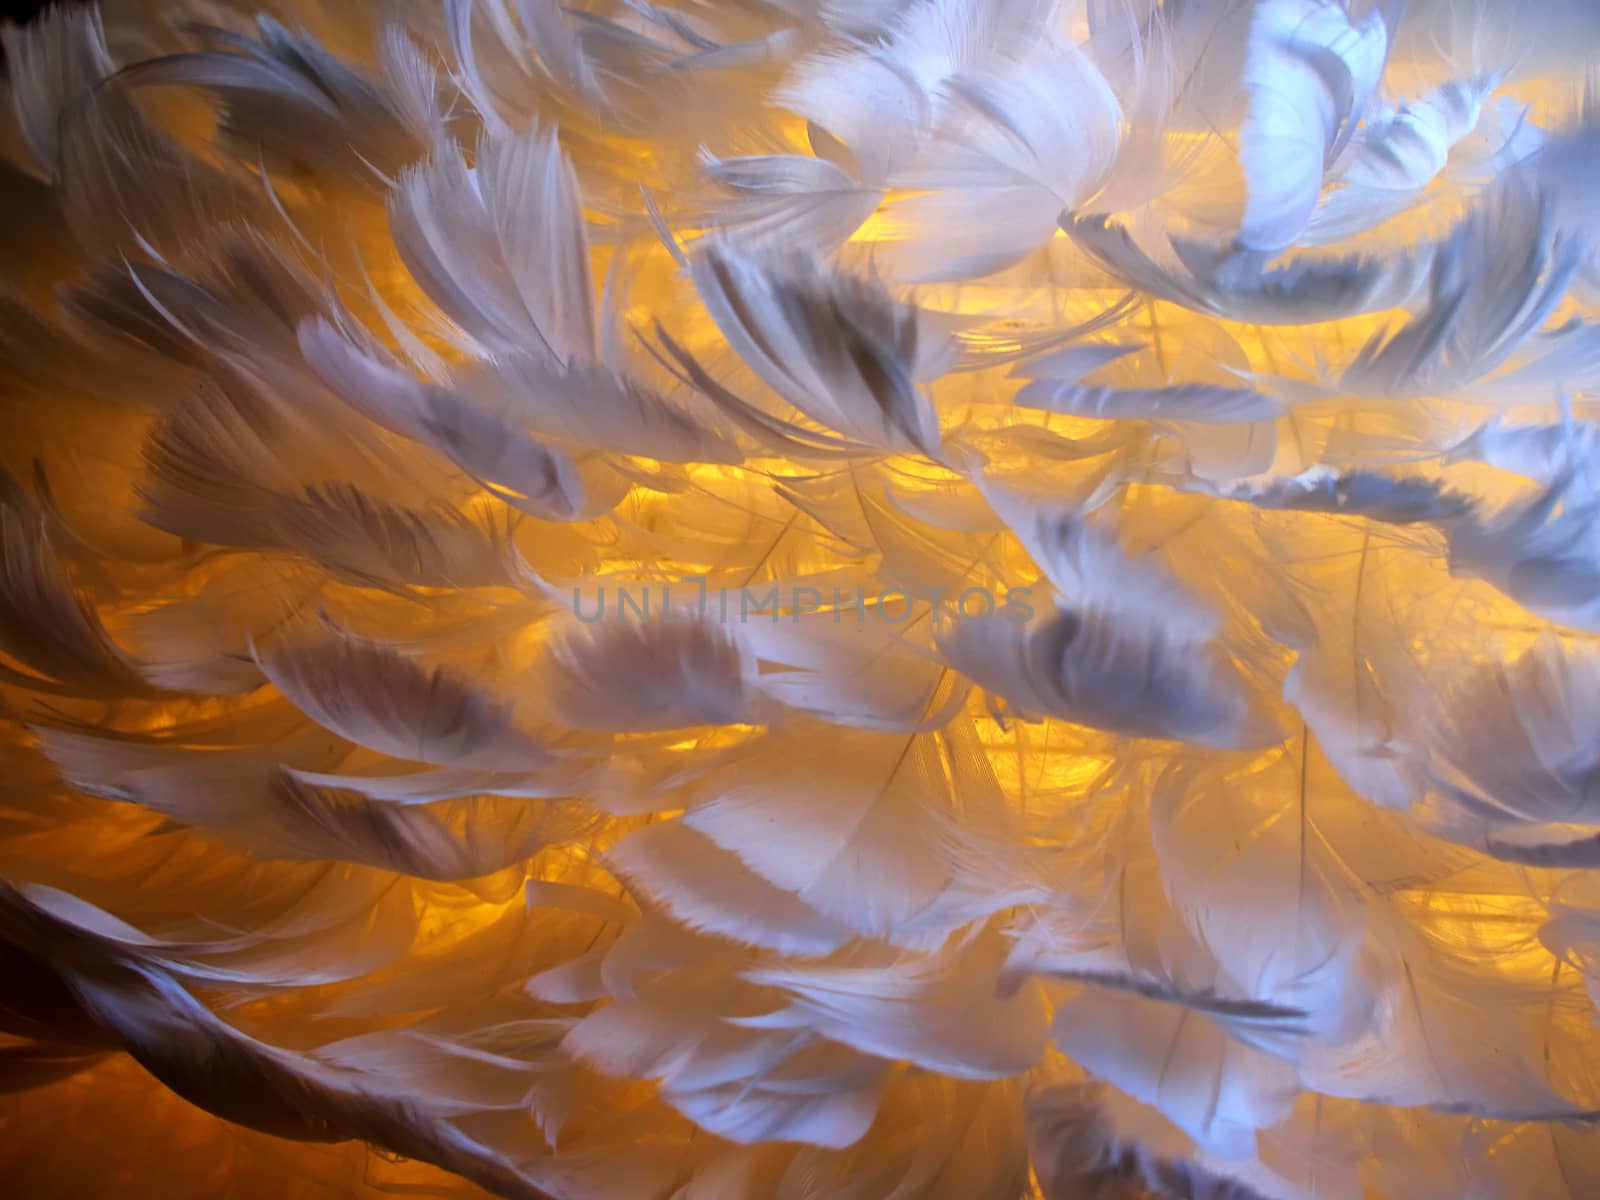 White feathers of a bird background image by Ronyzmbow